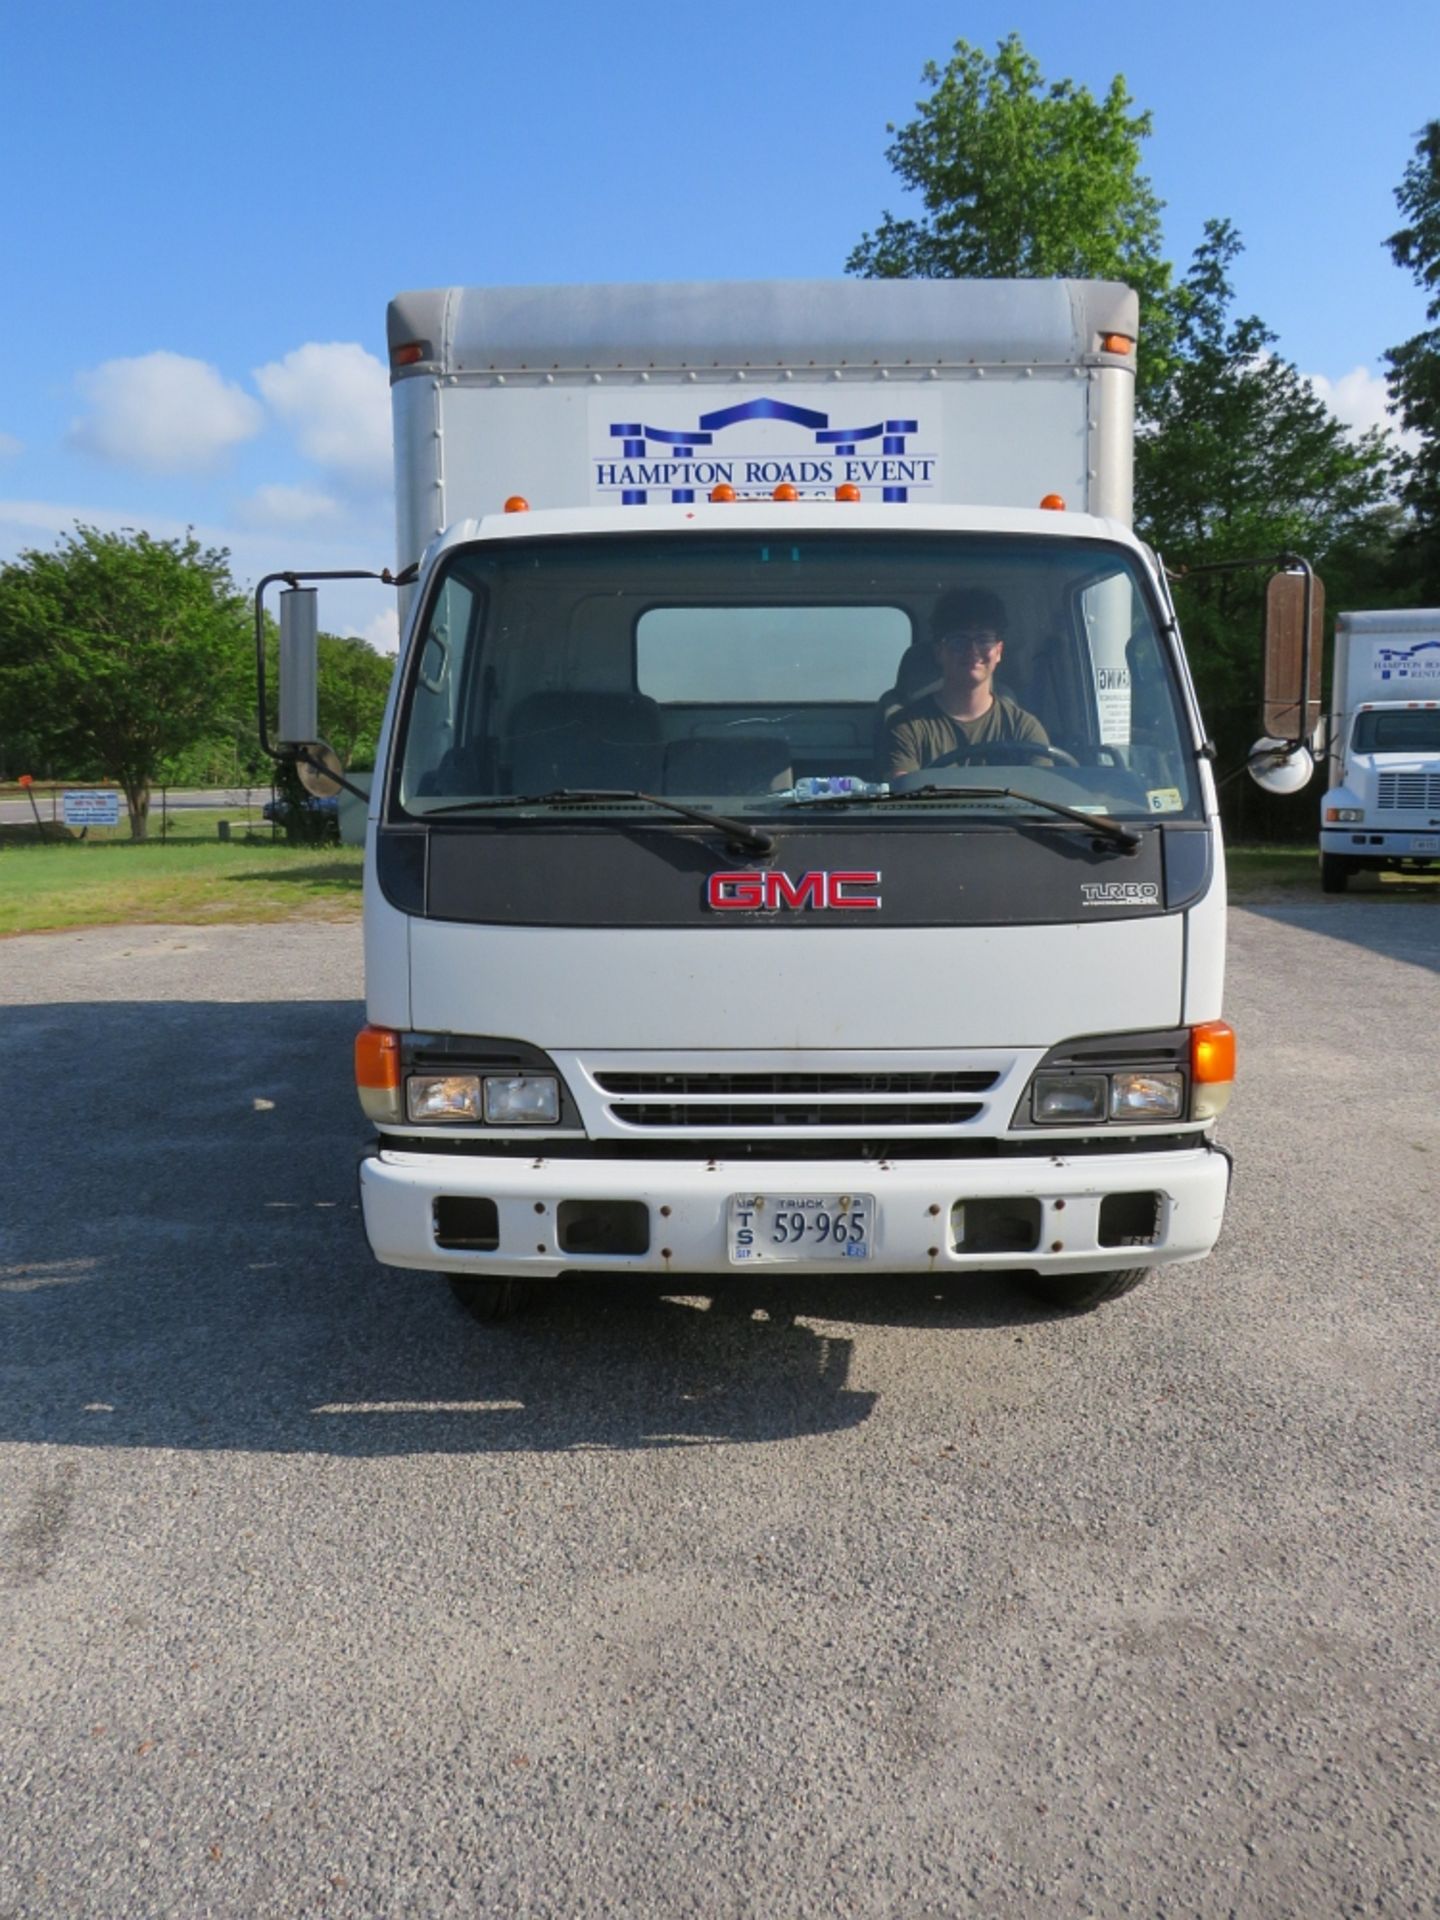 2005 GMC Delivery Truck, 14' Box, - Image 3 of 6